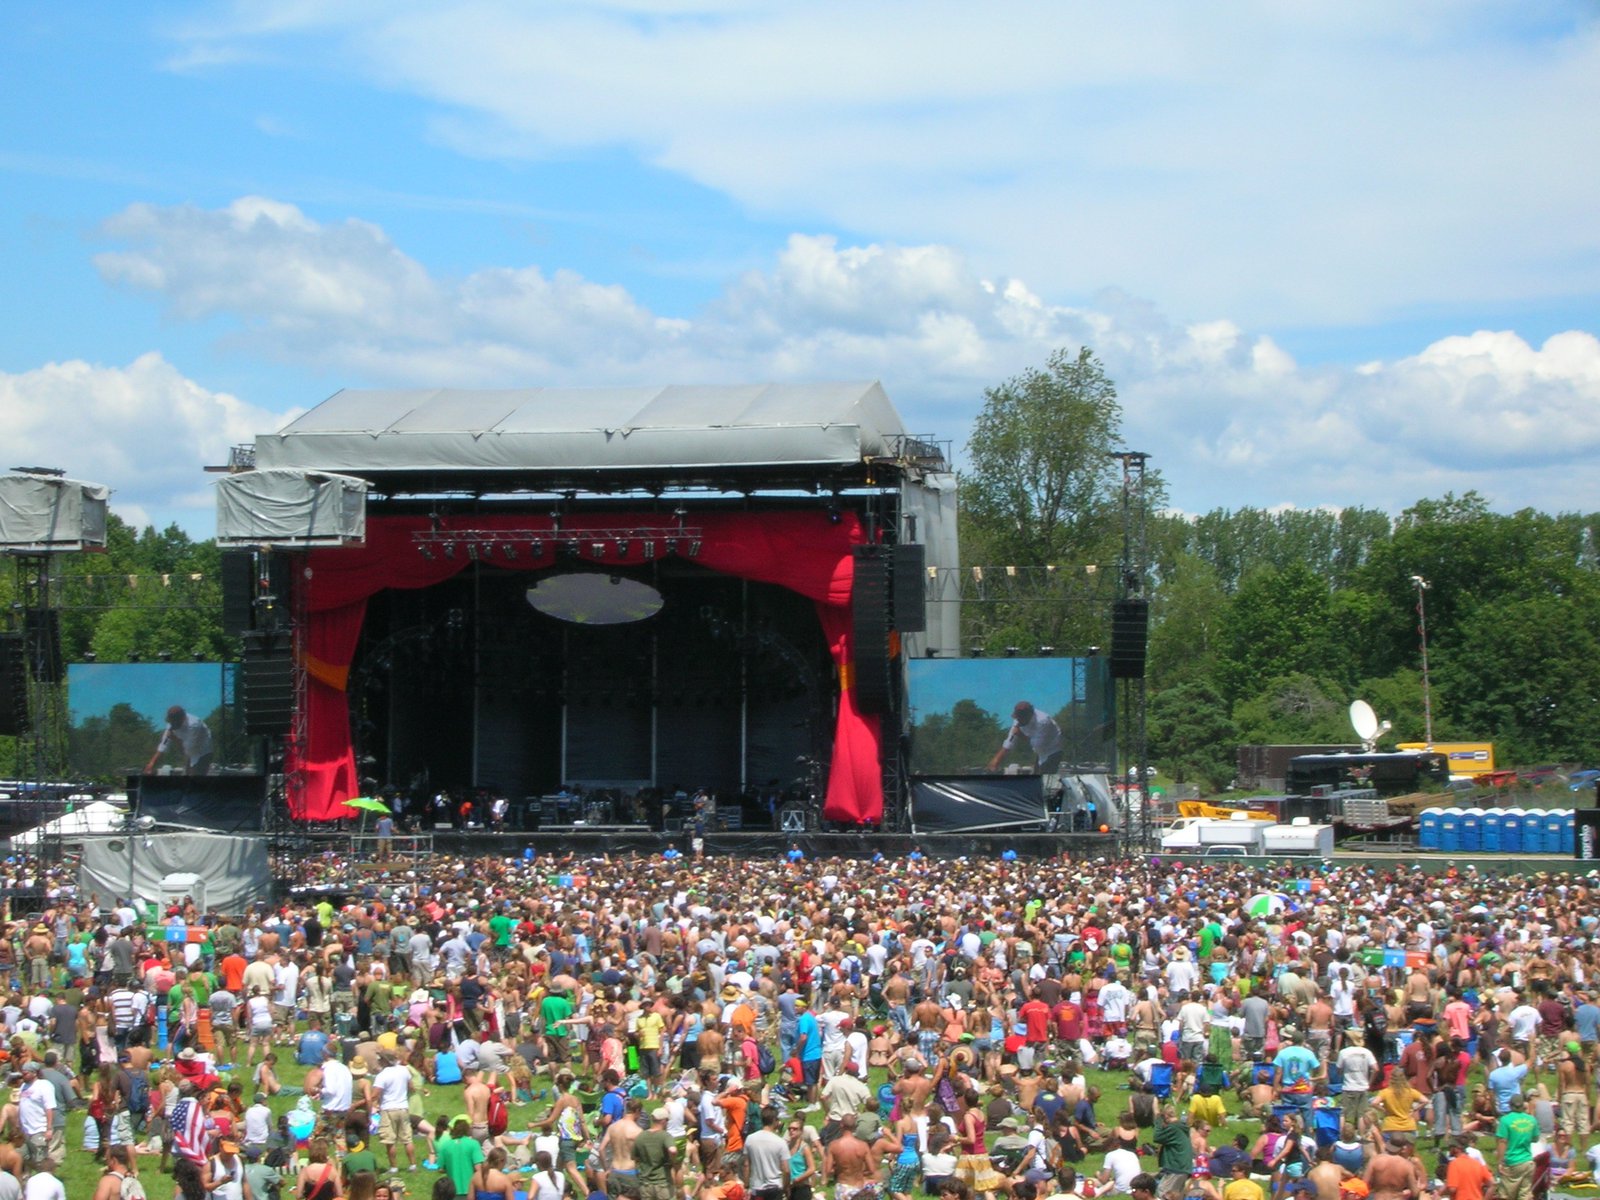 Mainstage at Rothbury during the Whalers